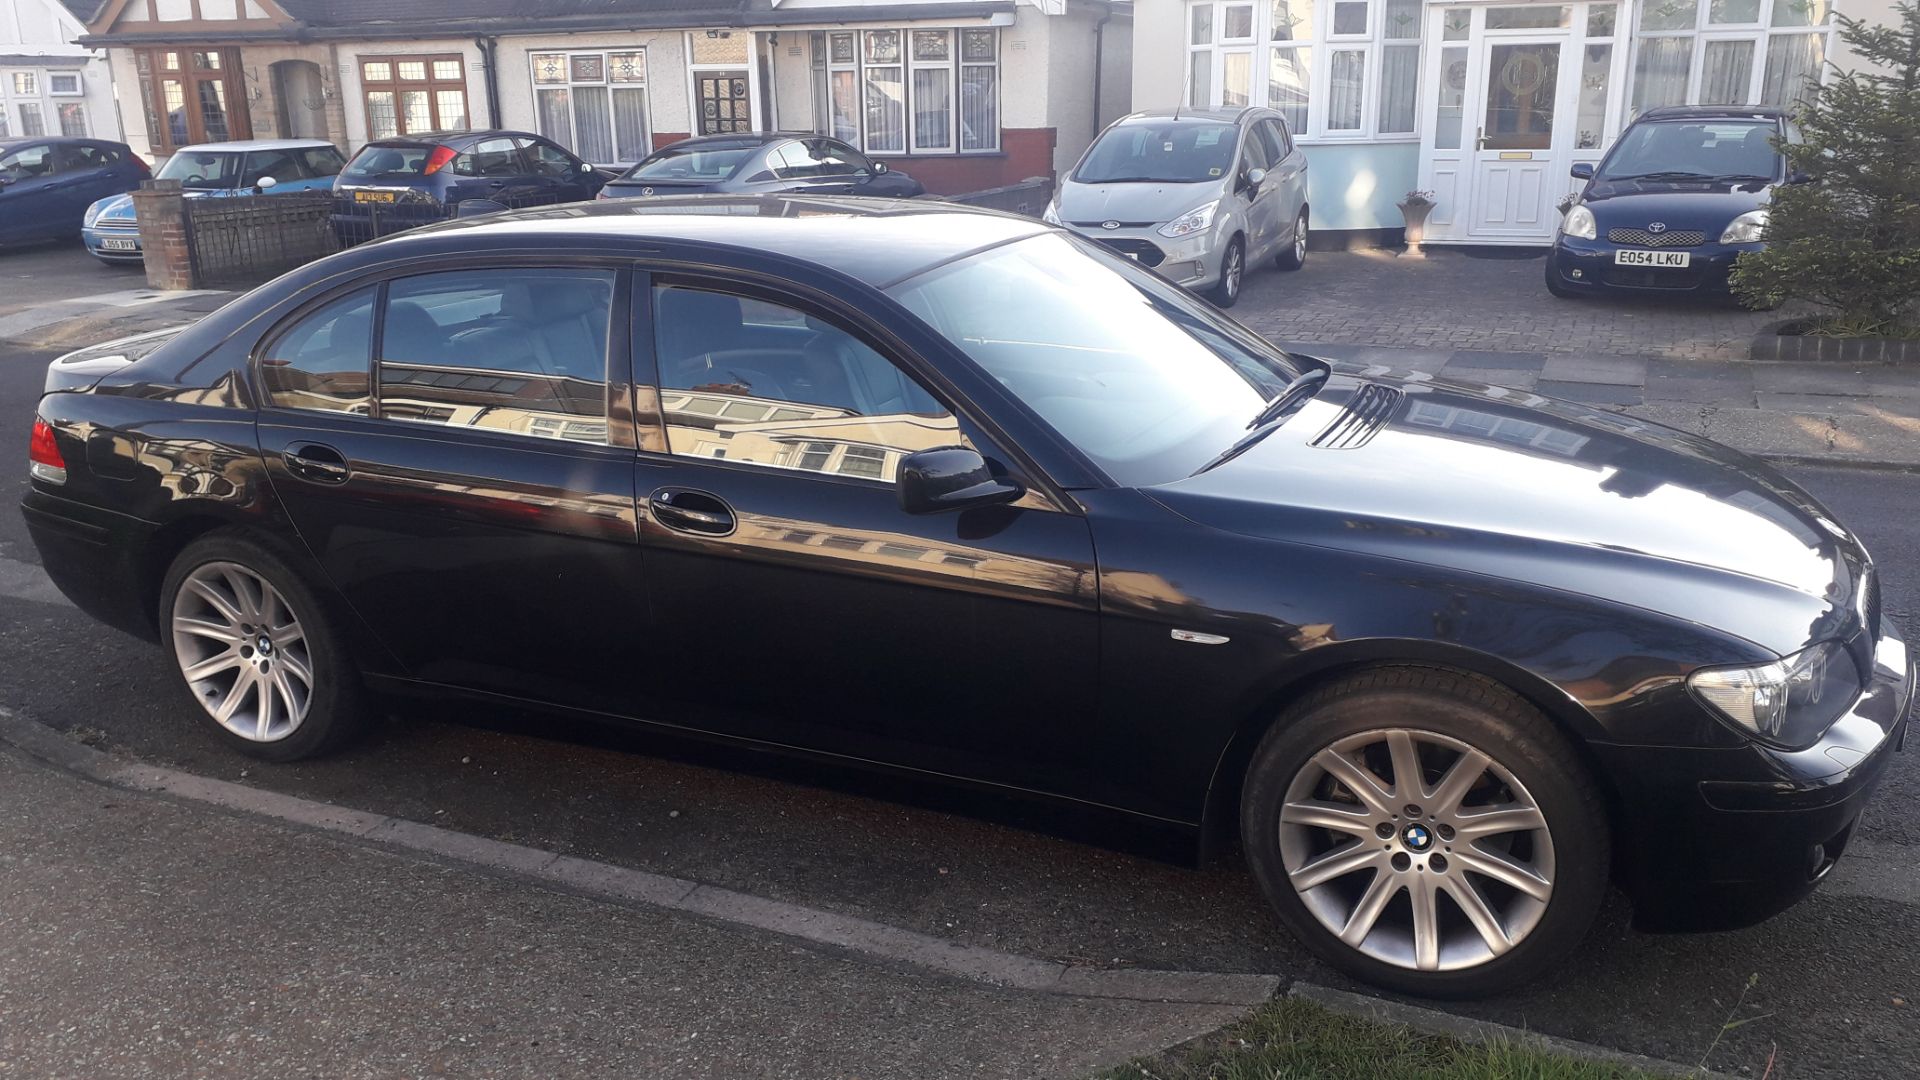 BMW 730Ld SE 4 Door Auto Saloon, colour black, registration YD08 WNT, first registered 21 March - Image 26 of 32